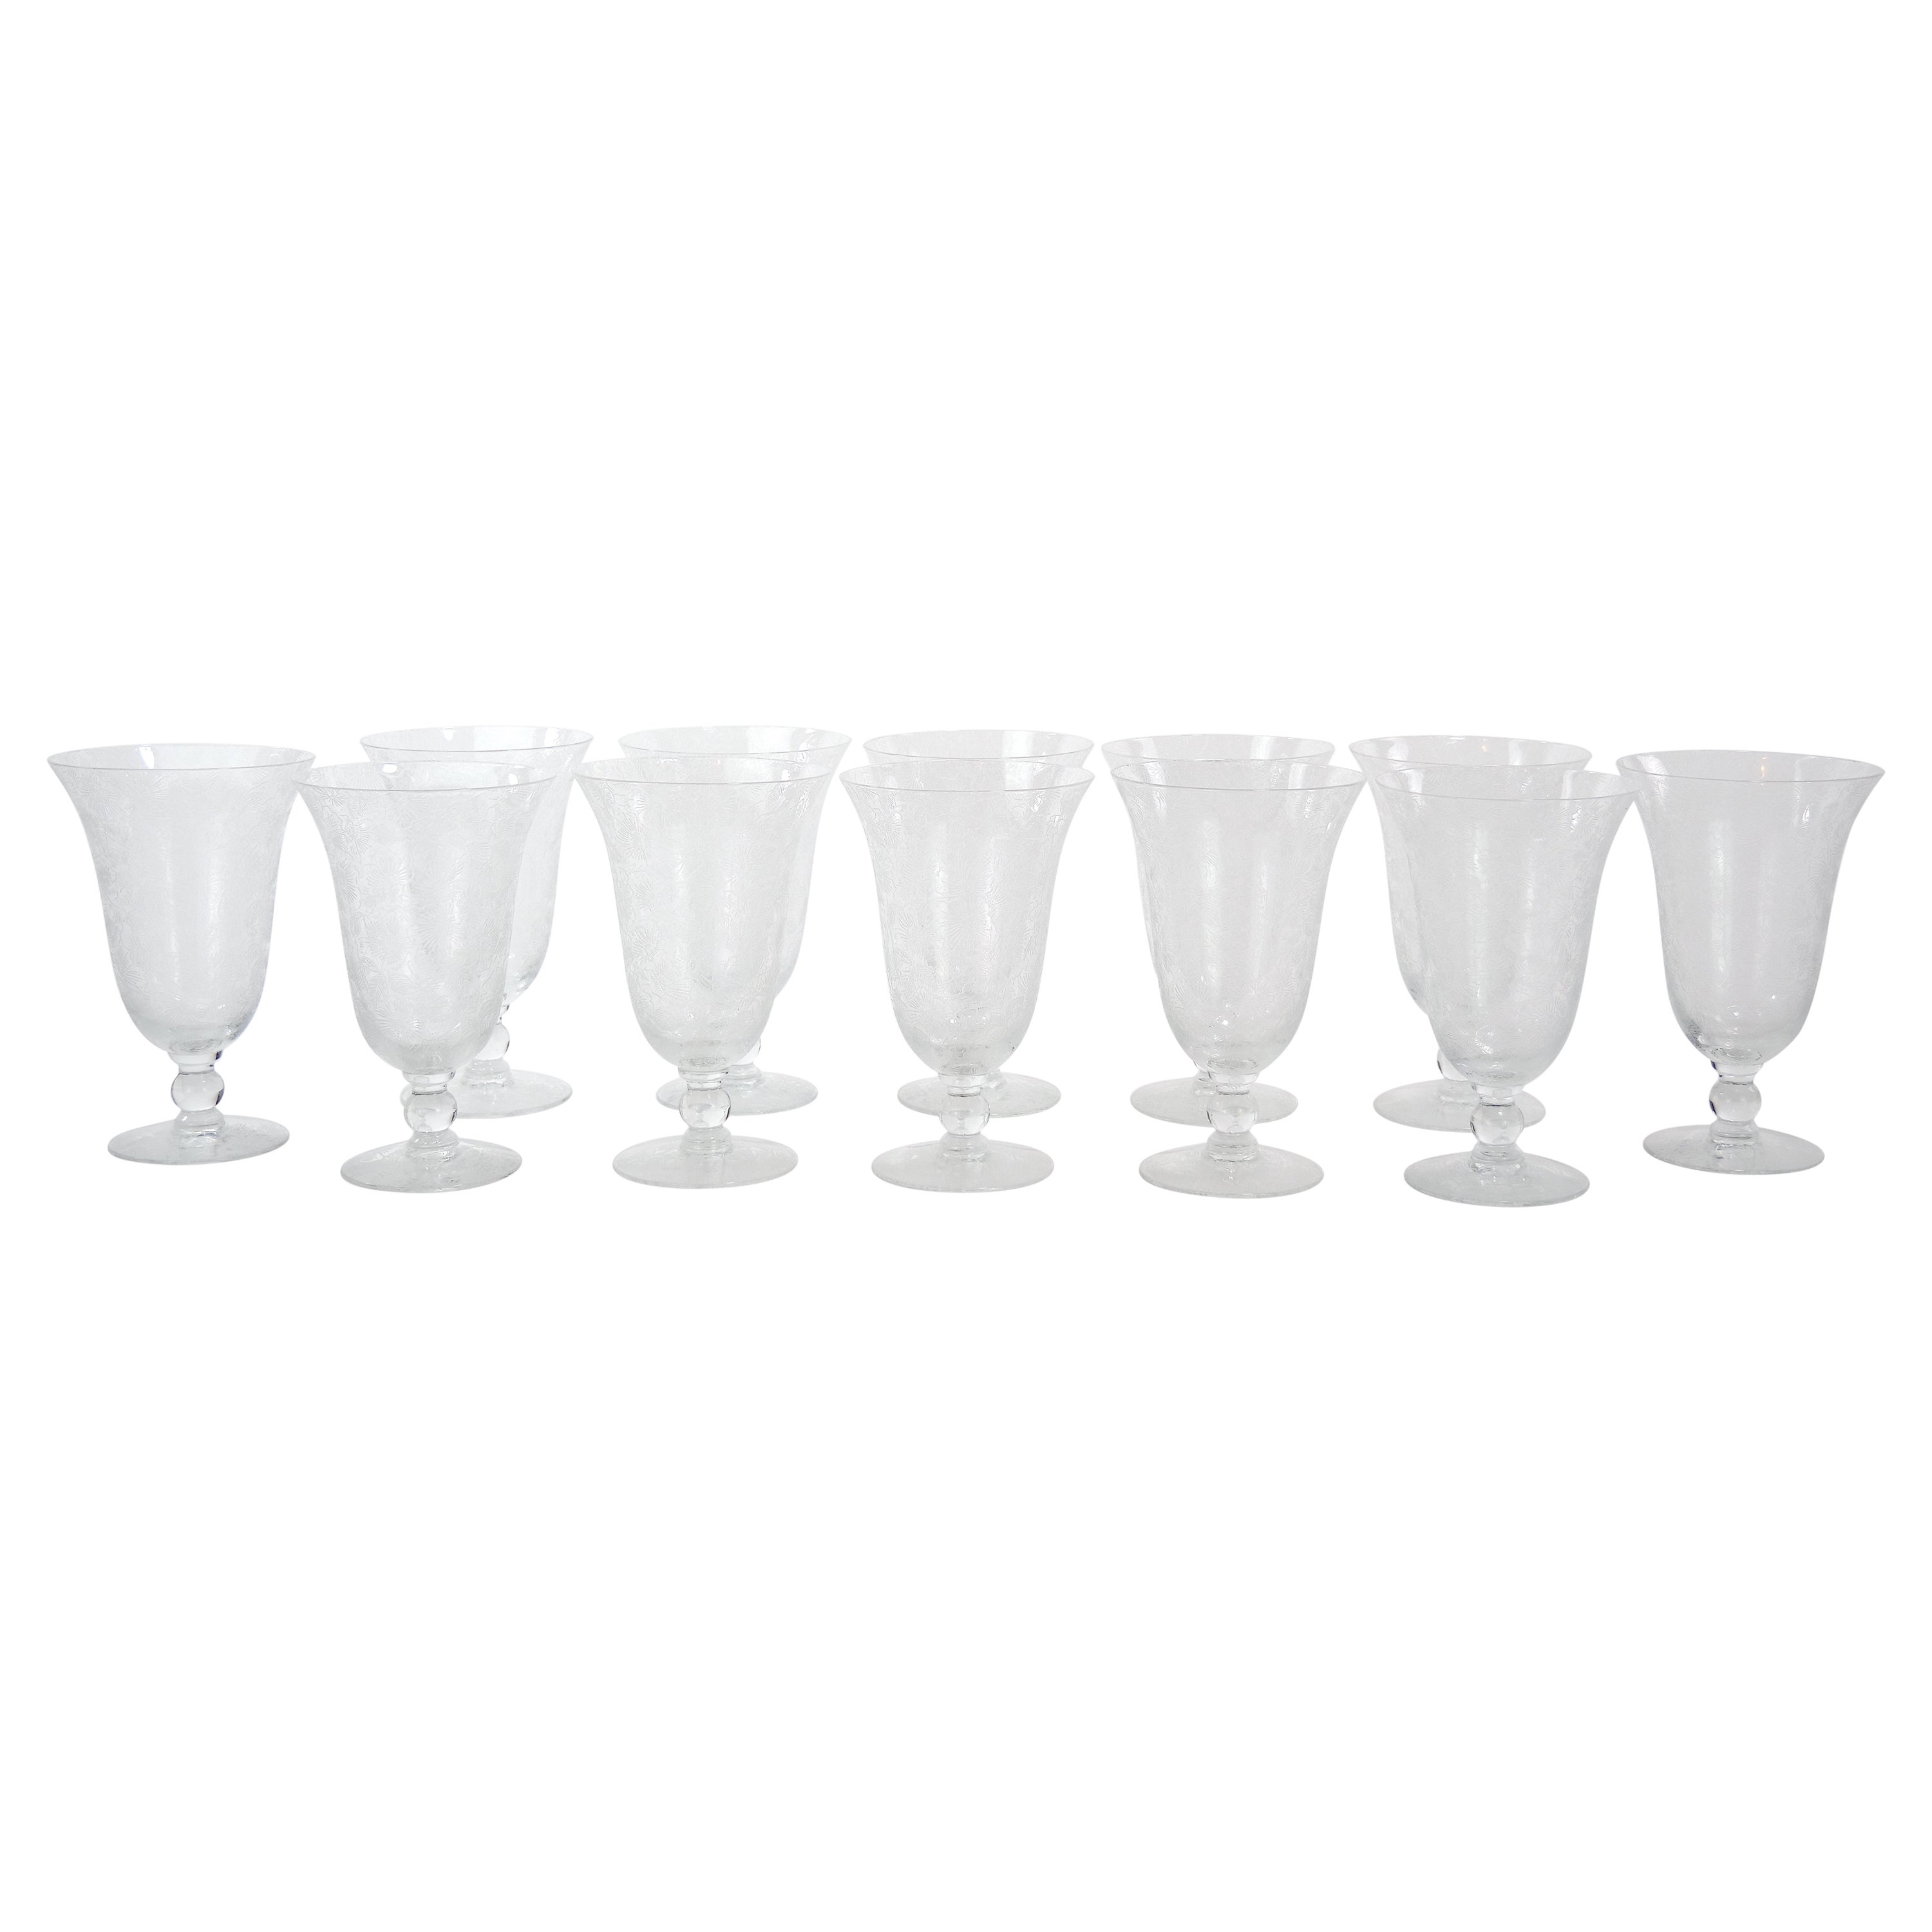  Hand Etched Tableware Glassware Service / 12 People